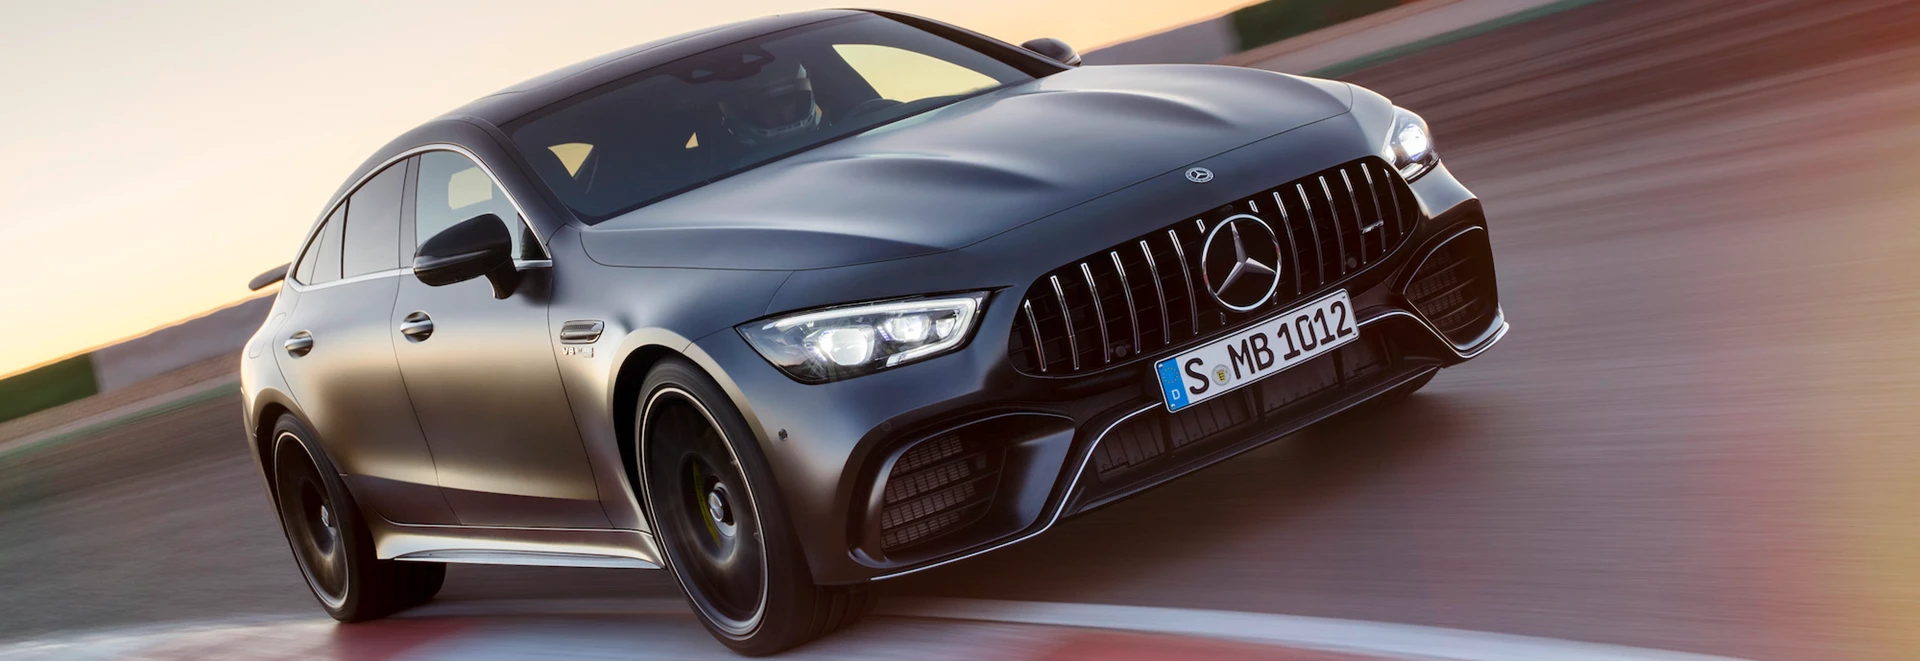 The Mercedes-AMG GT 4-Door coupe has arrived!